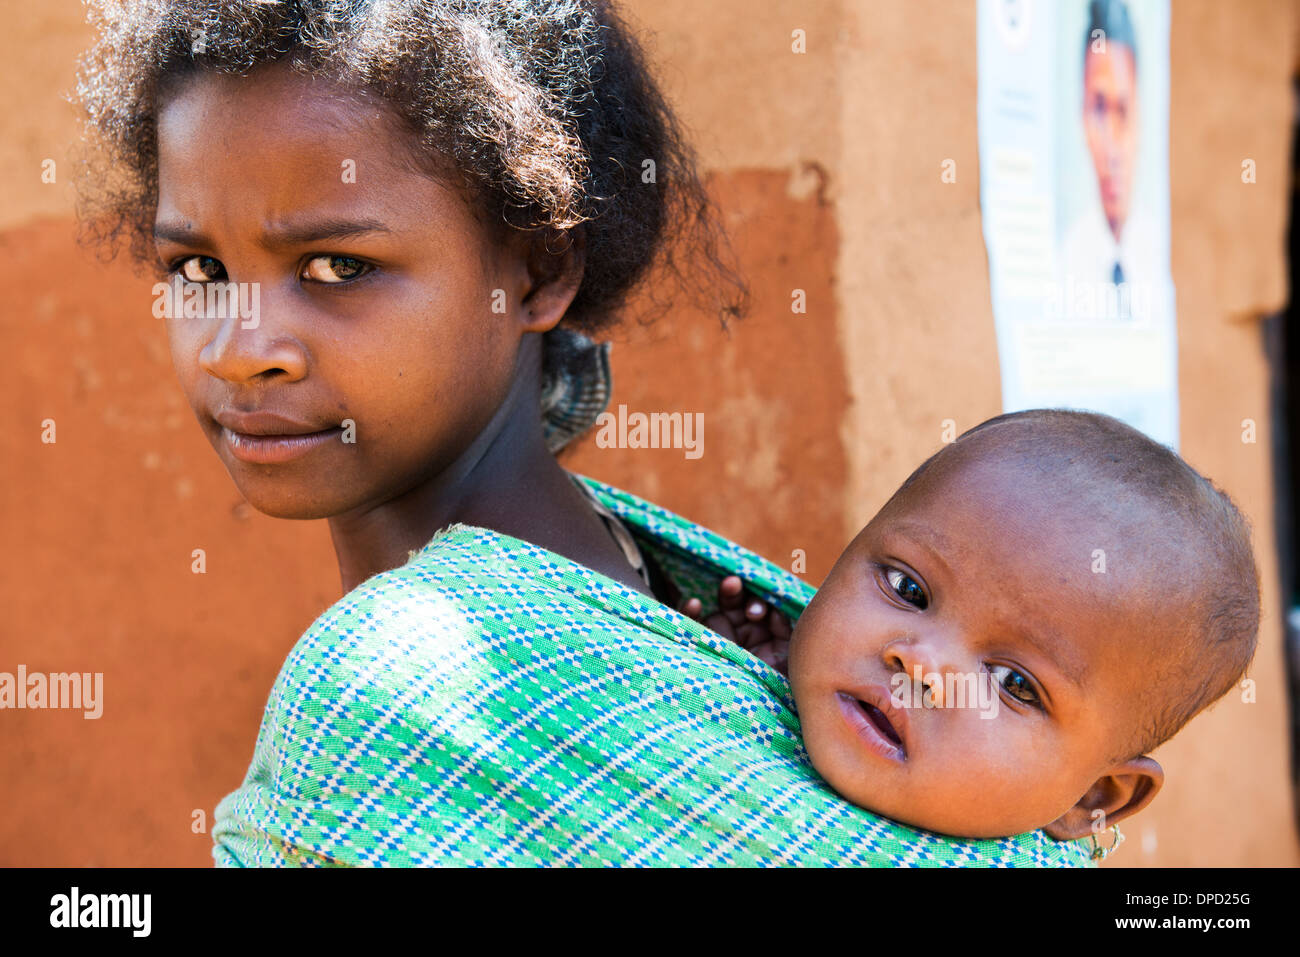 Siblings. A young girl carrying her infant sibling. Stock Photo